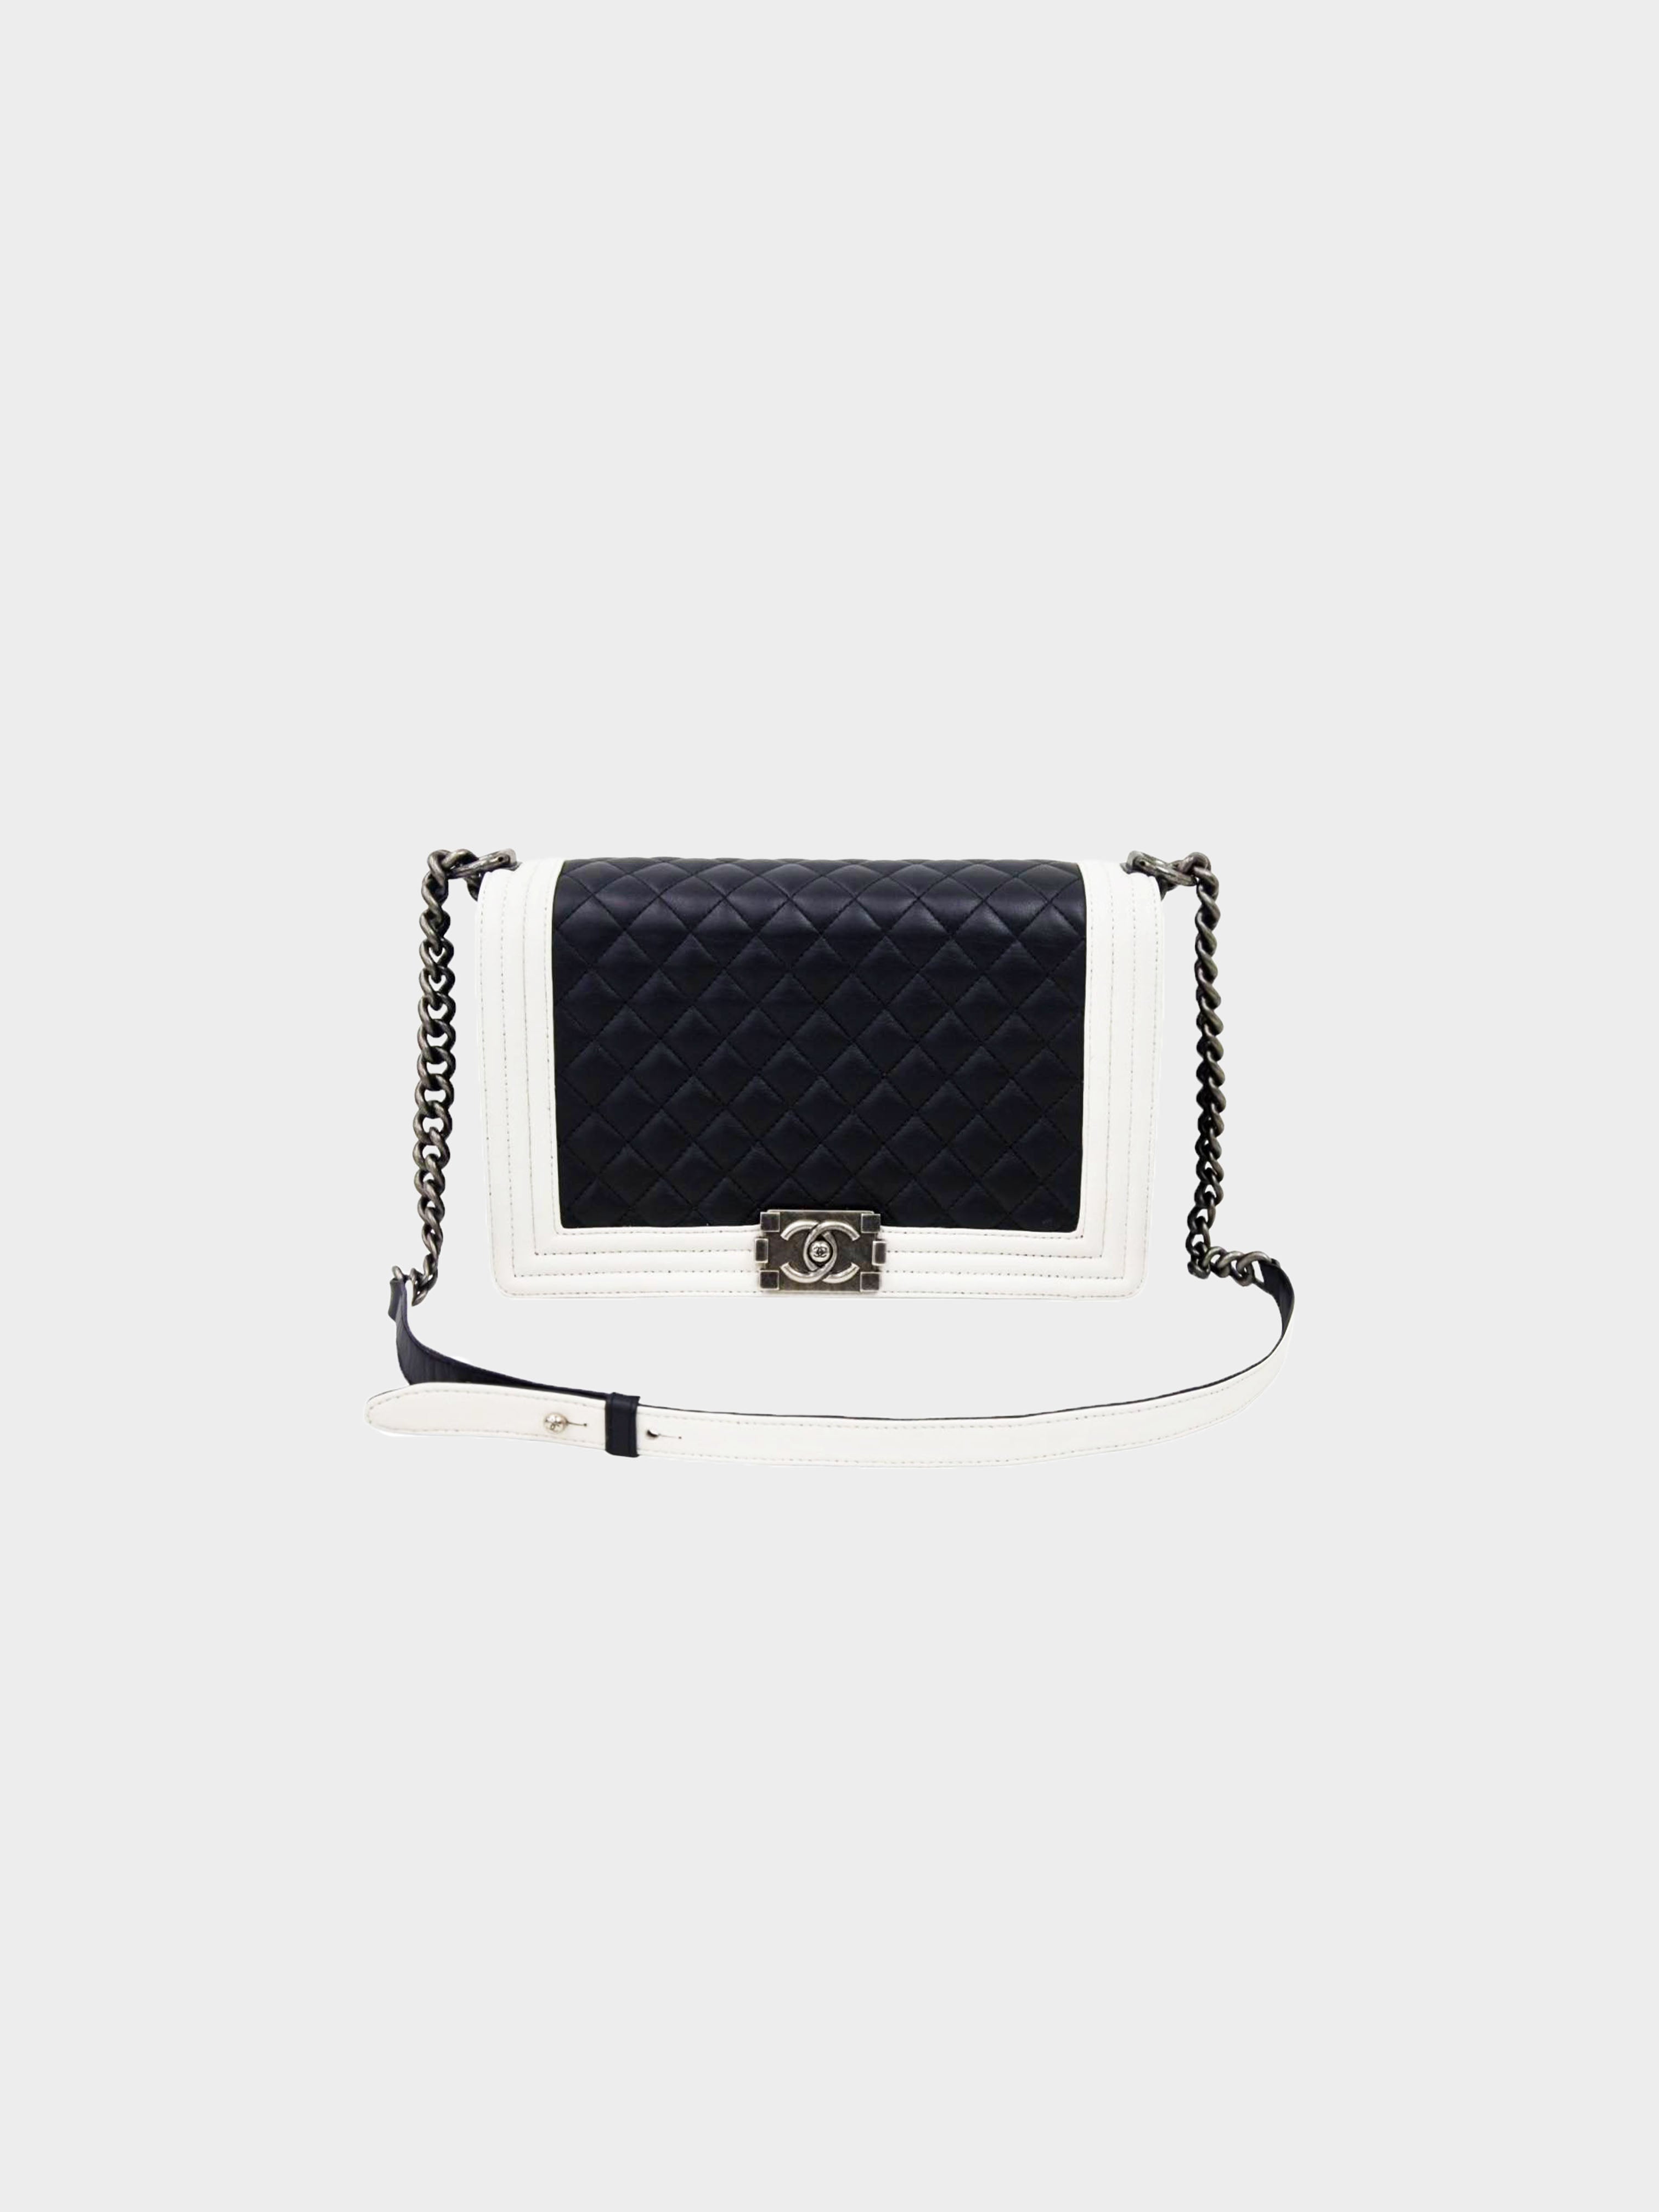 Chanel 2014 Black and White Quilted Lambskin Boy Bag